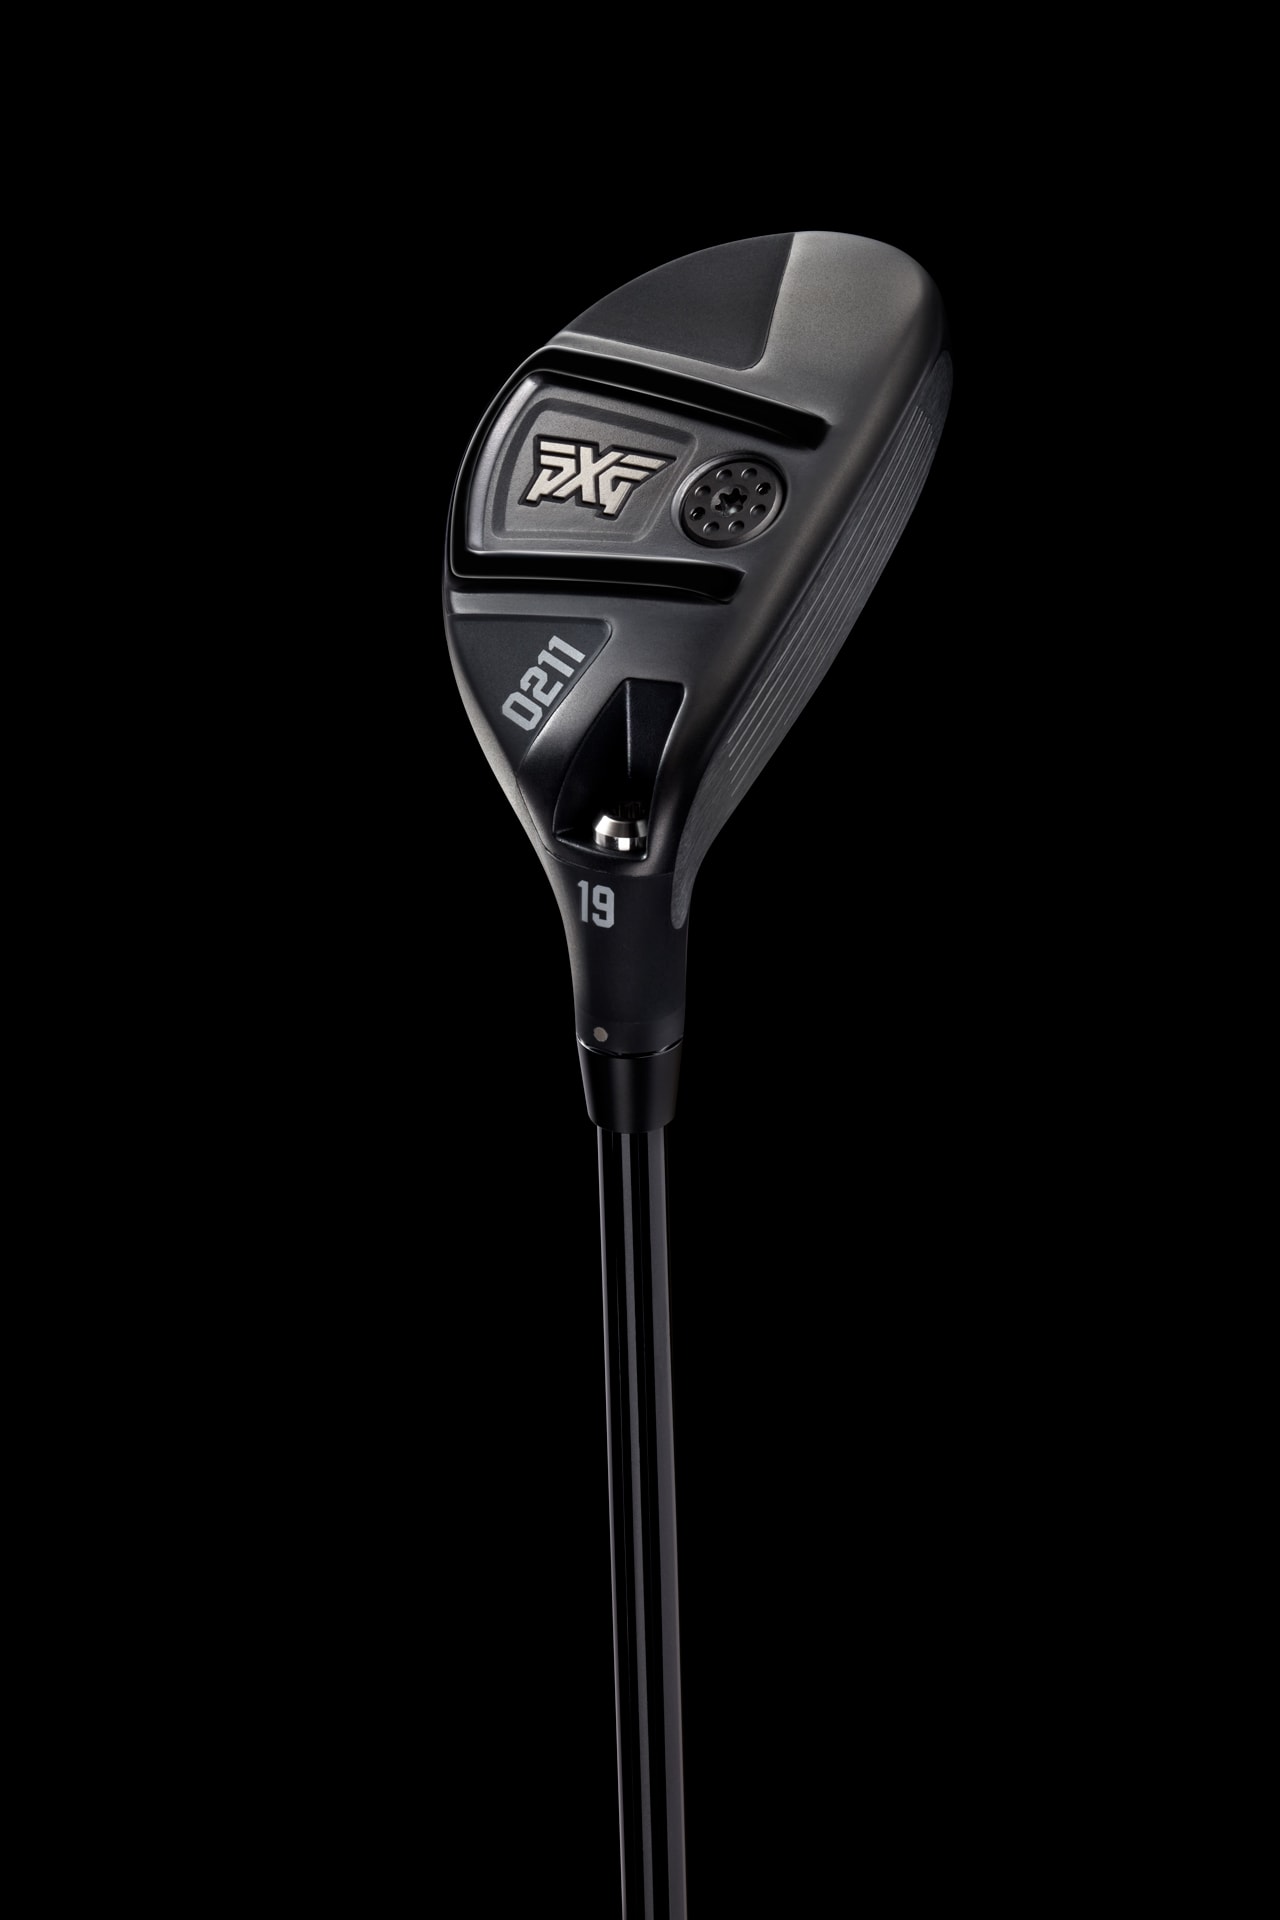 This brand-new, adjustable club is a Cool Golf Thing